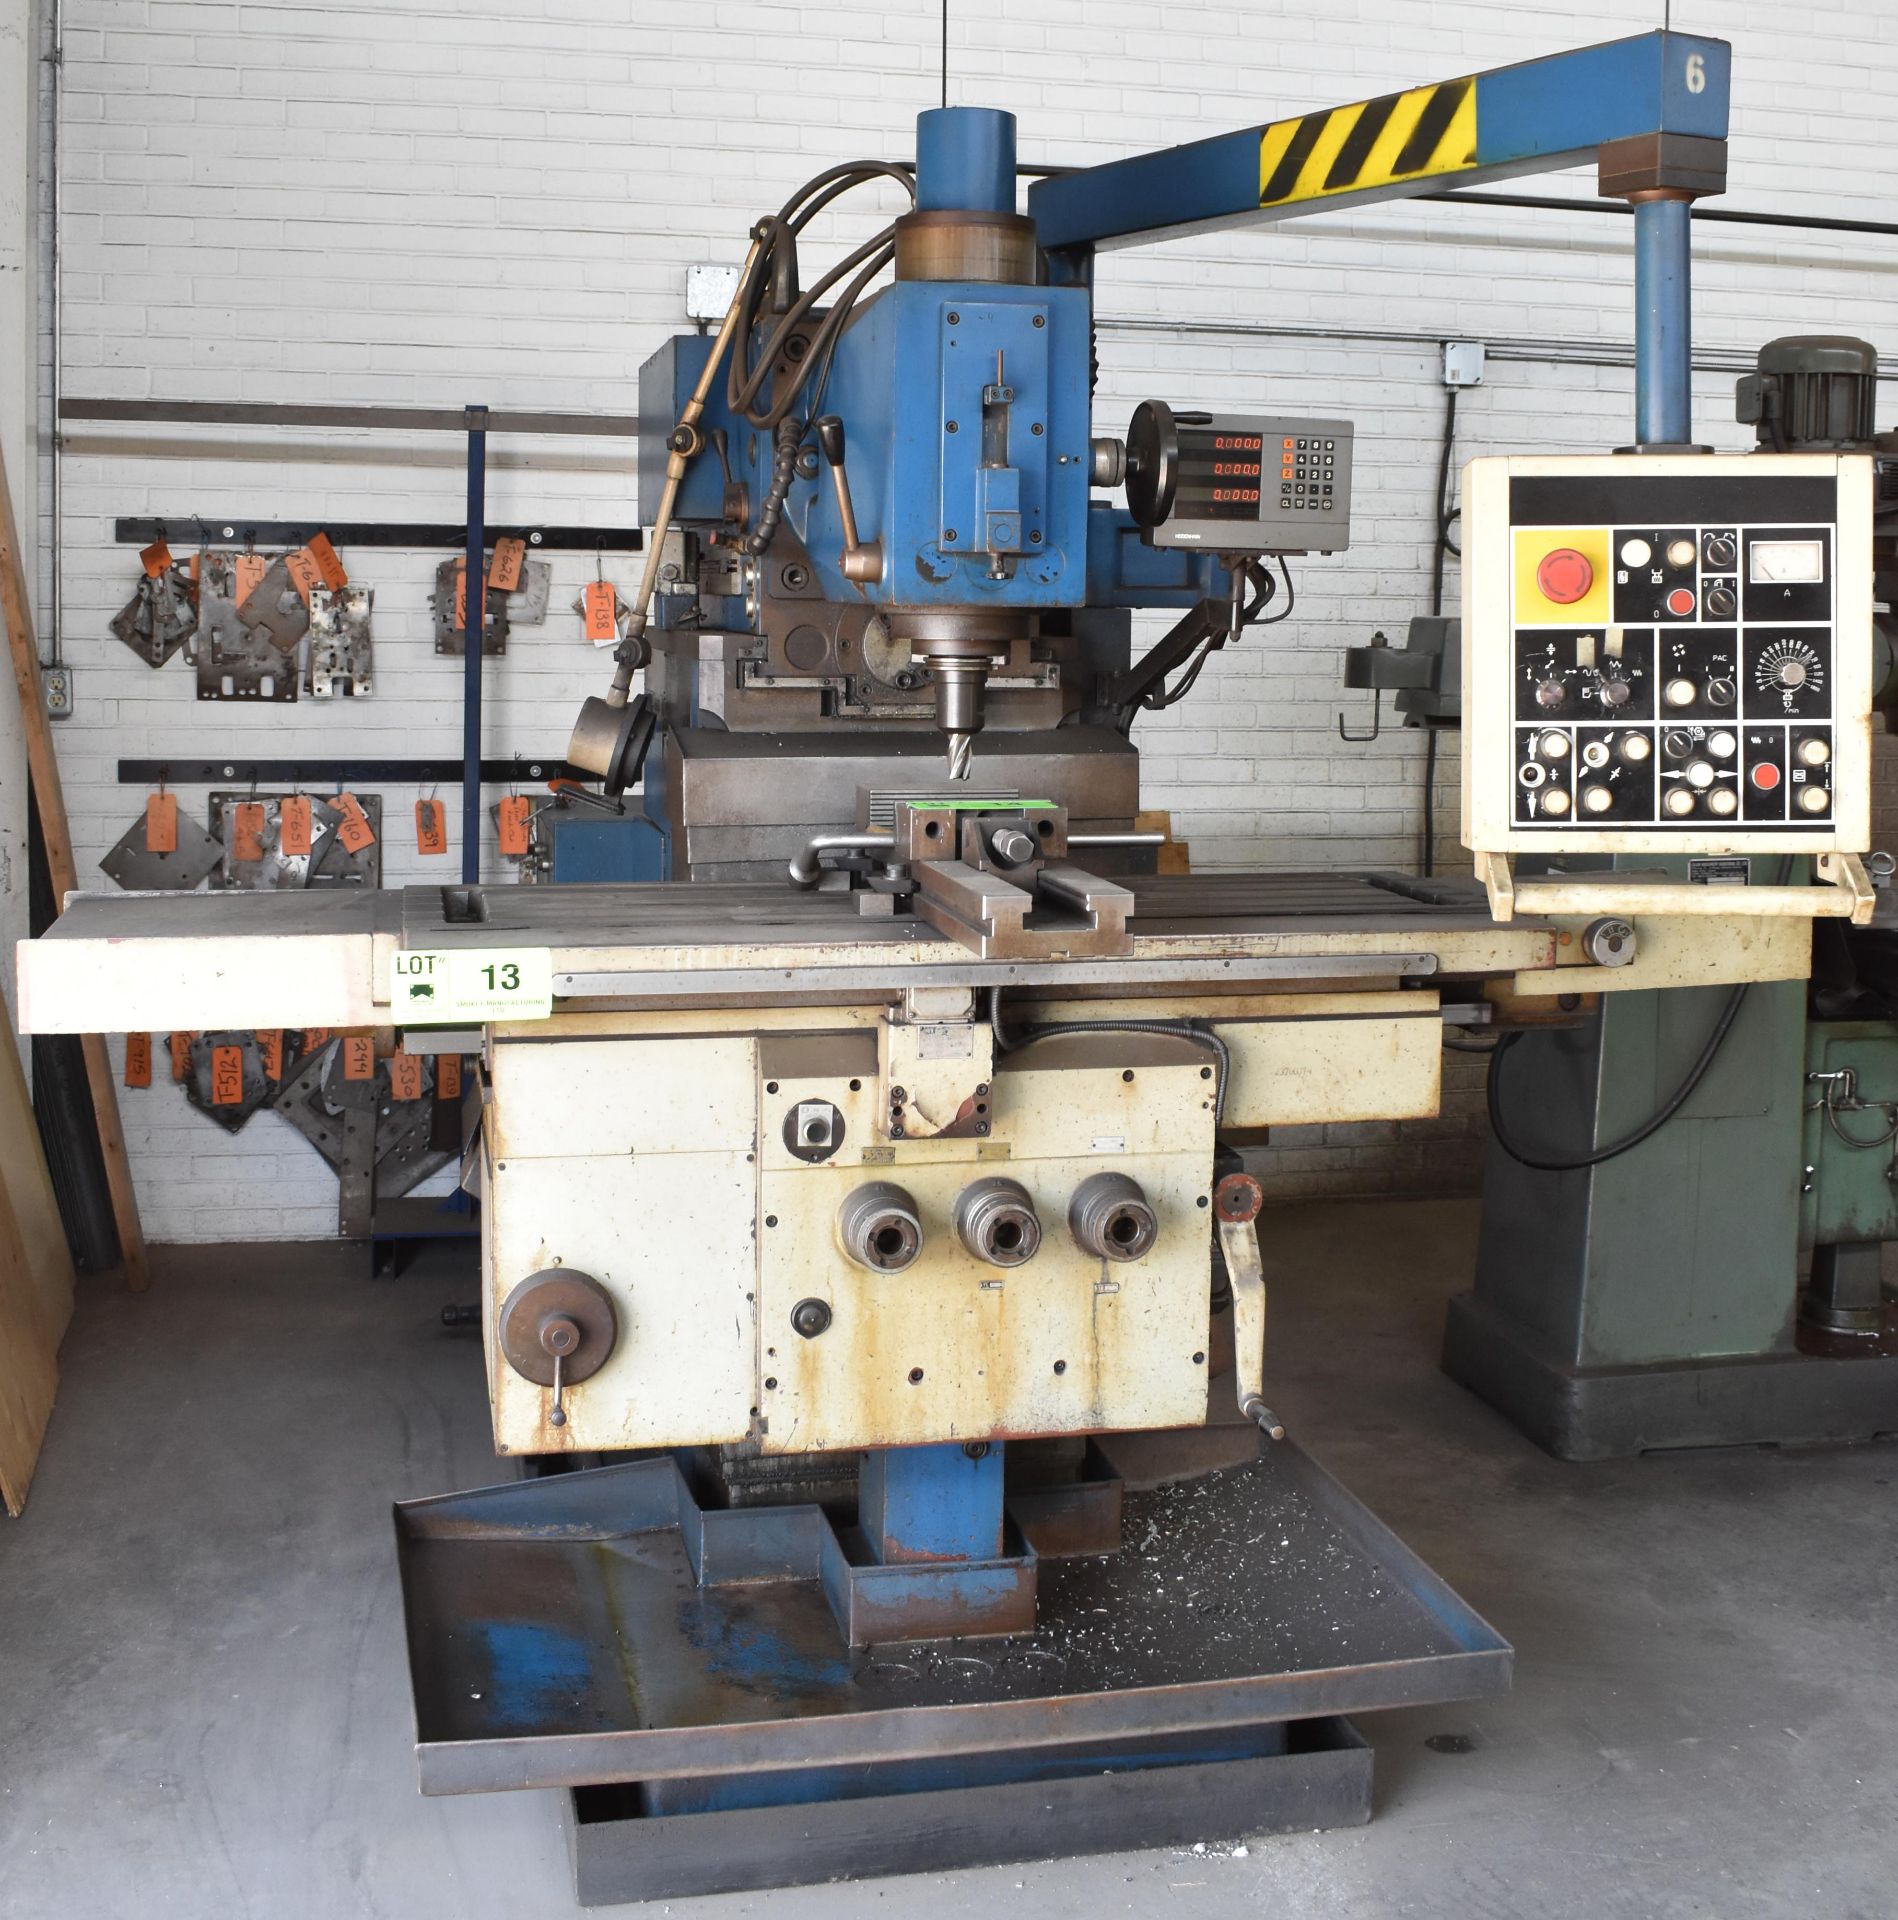 TOS FGS 32/40 UNIVERSAL MILLING MACHINE WITH 54"X16" TABLE, SPEEDS TO 1800 RPM, HEIDENHAIN 3 AXIS